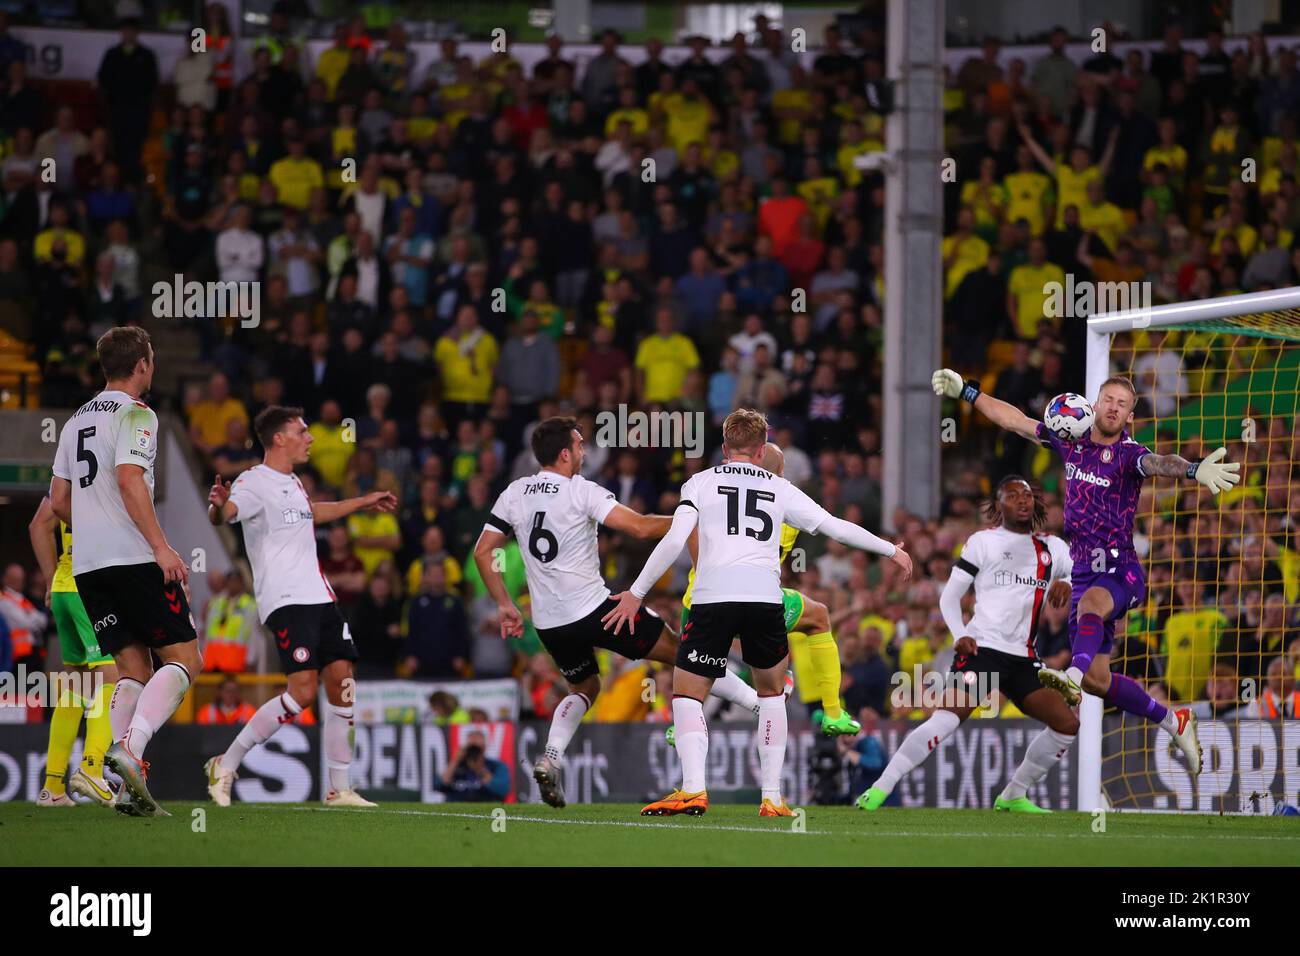 Daniel Bentley of Bristol City makes a save to deny Teemu Pukki of Norwich City - Norwich City v Bristol City, Sky Bet Championship, Carrow Road, Norwich, UK - 14th September 2022  Editorial Use Only - DataCo restrictions apply Stock Photo